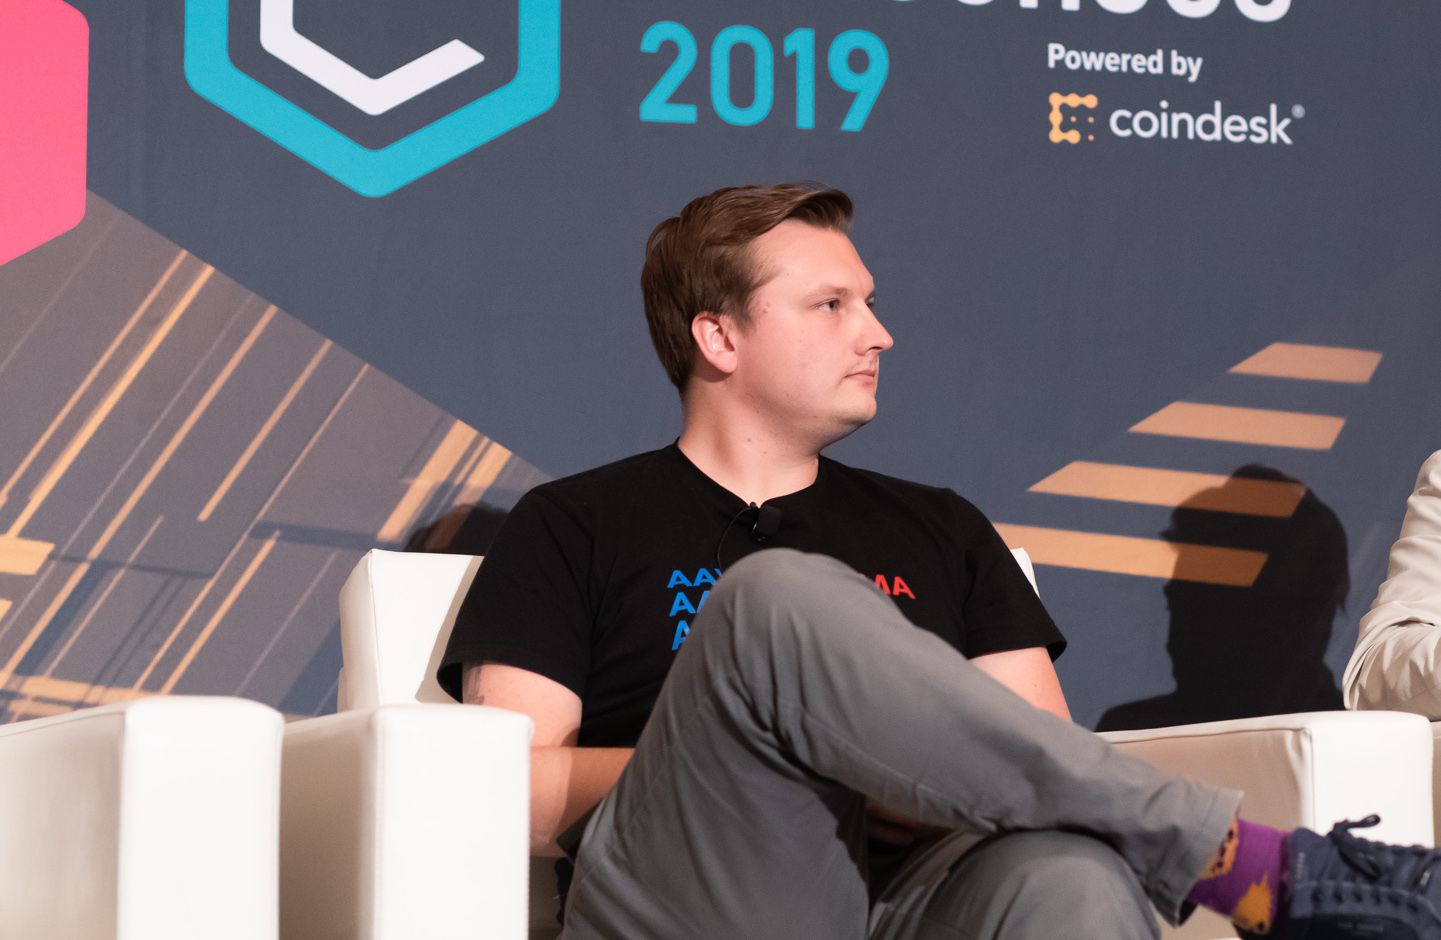 Stani Kulechov, founder of Aave, at Consensus 2019 (CoinDesk archive)